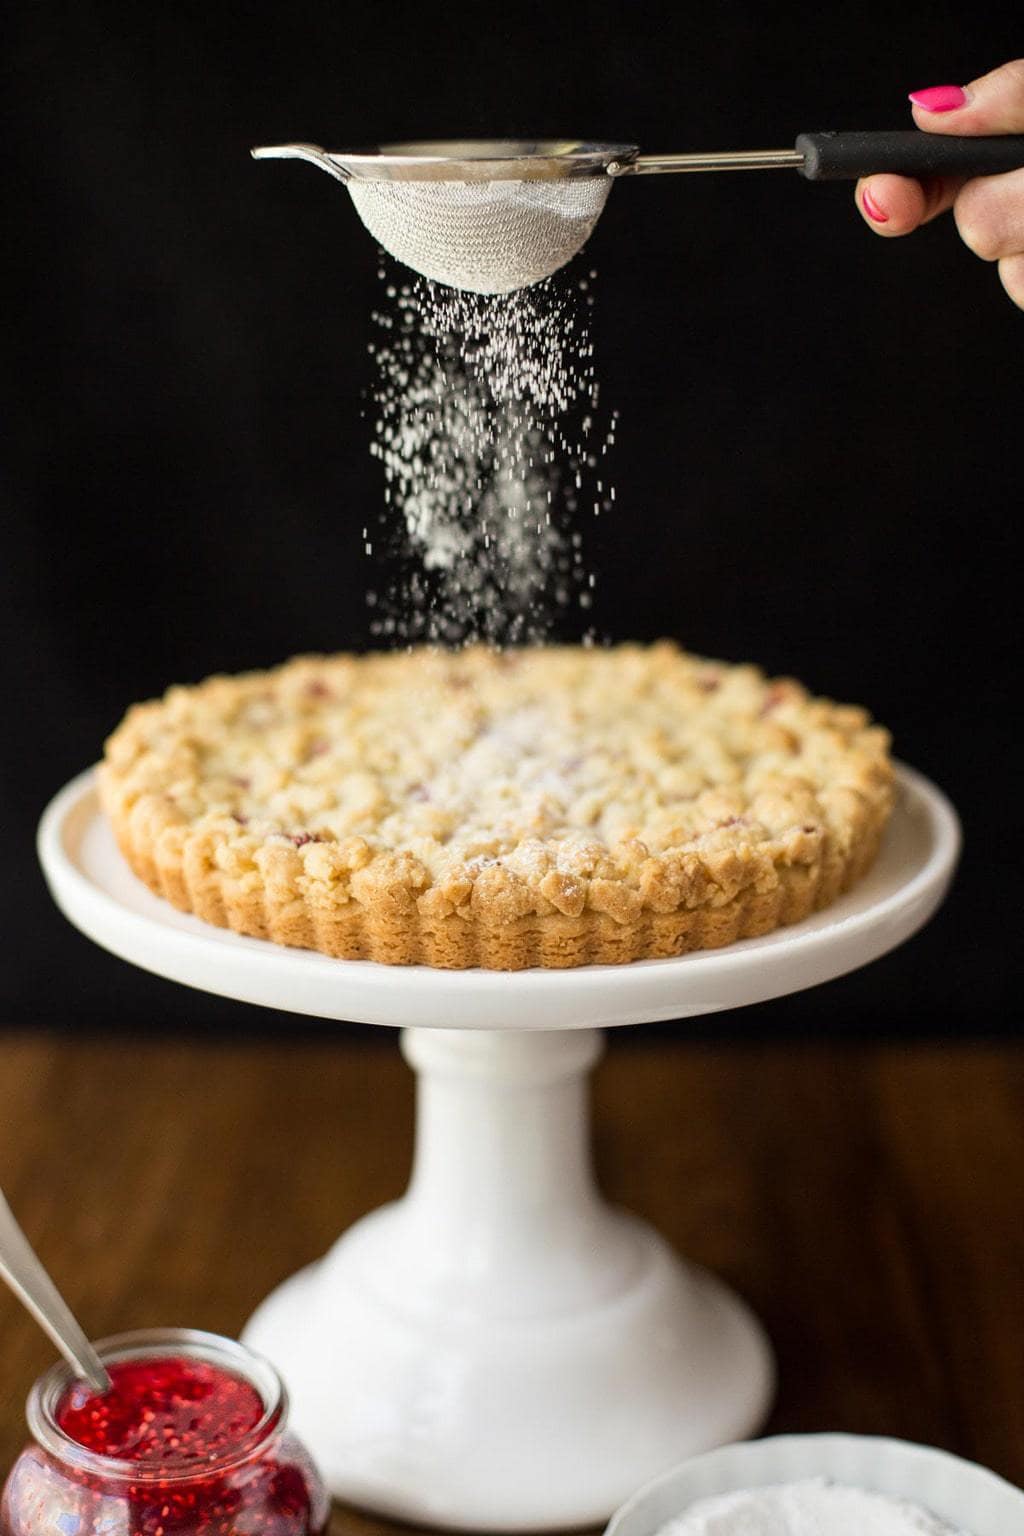 Photo of powdered sugar being sifted on a Raspberry Jam Shortbread Tart. The tart is on a white display pedestal with a jar of raspberry jam and a dish of powdered sugar in the foreground.